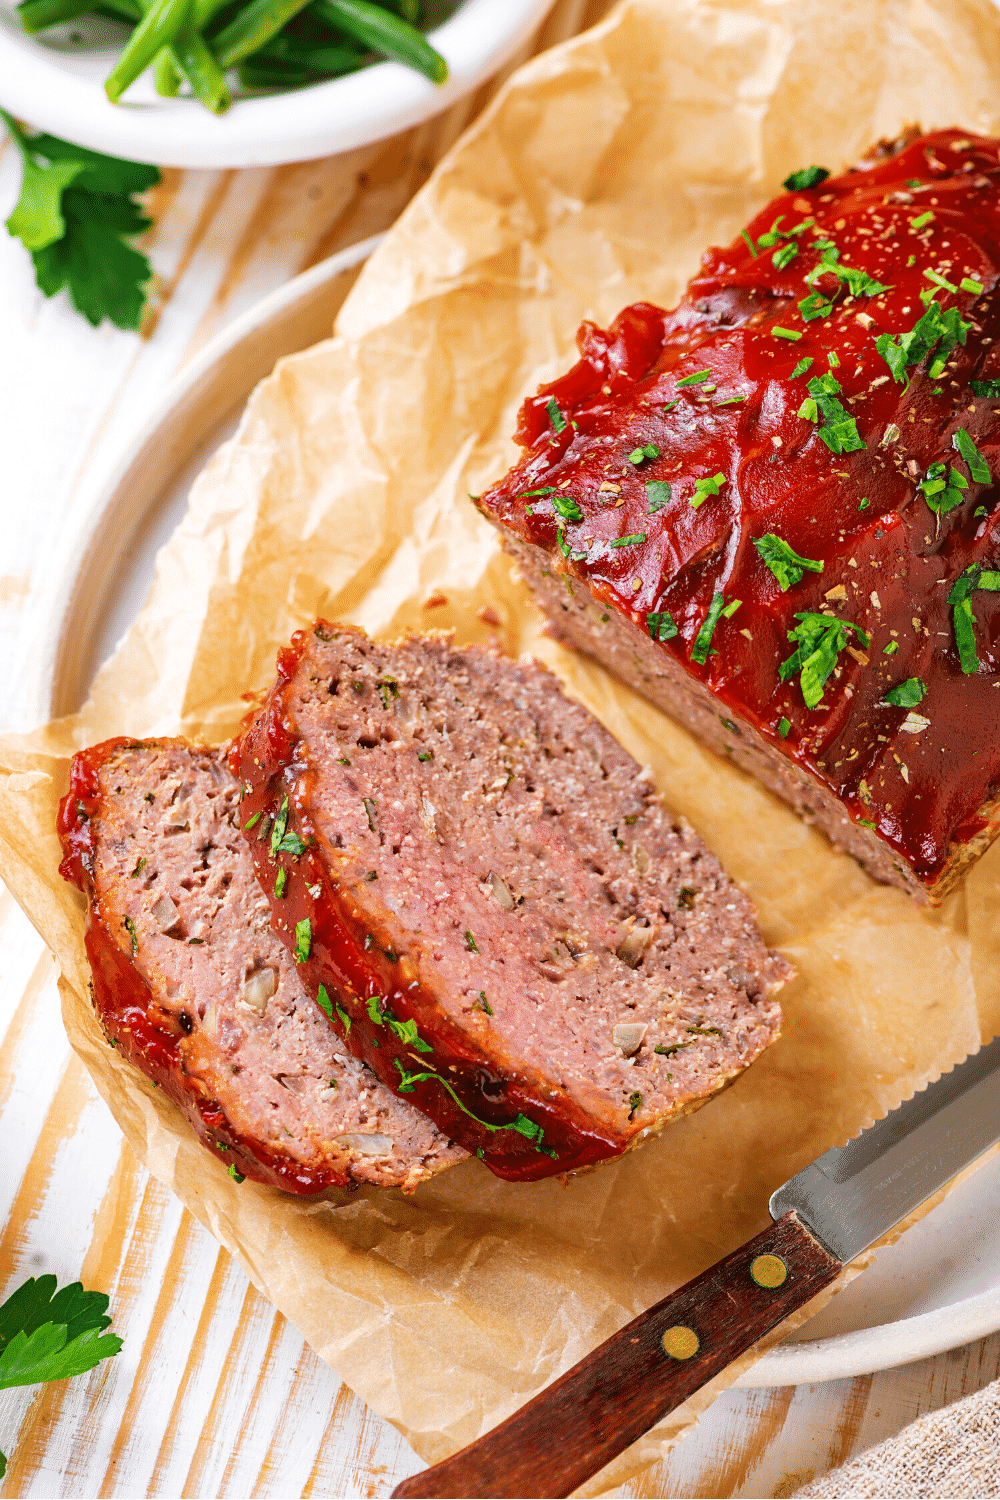 A whole meatloaf with two slices of meatloaf in front of it. The meatloaf is on a piece of parchment paper on a white plate.